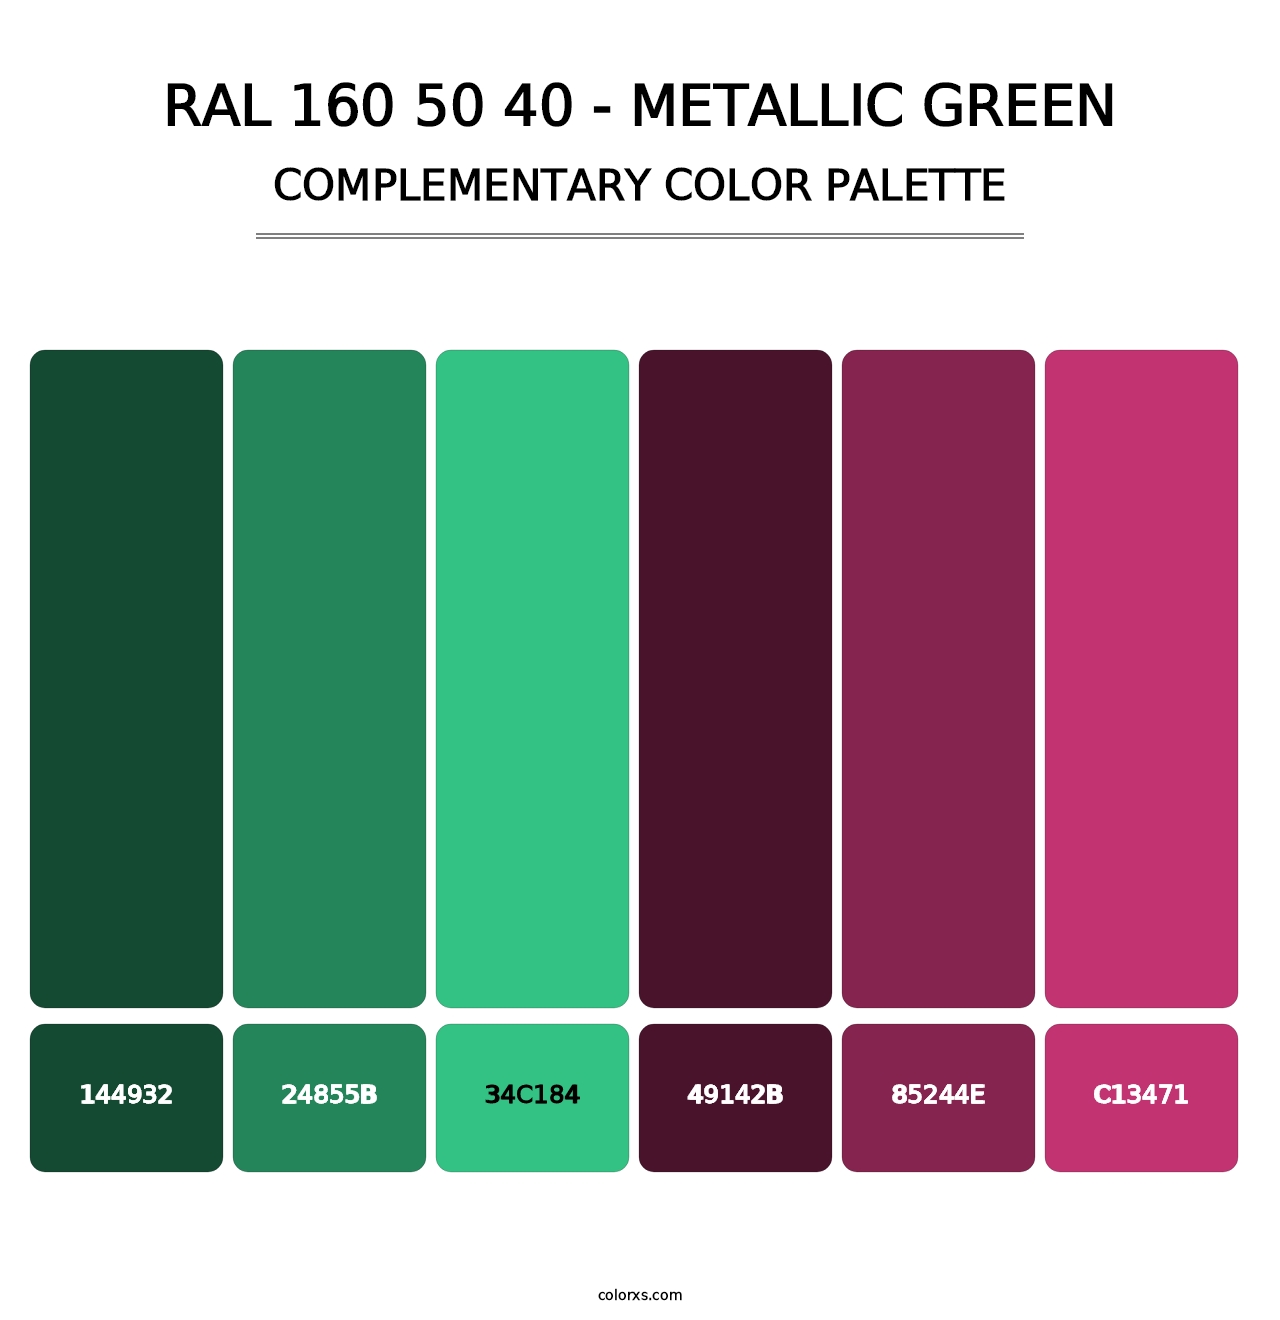 RAL 160 50 40 - Metallic Green - Complementary Color Palette